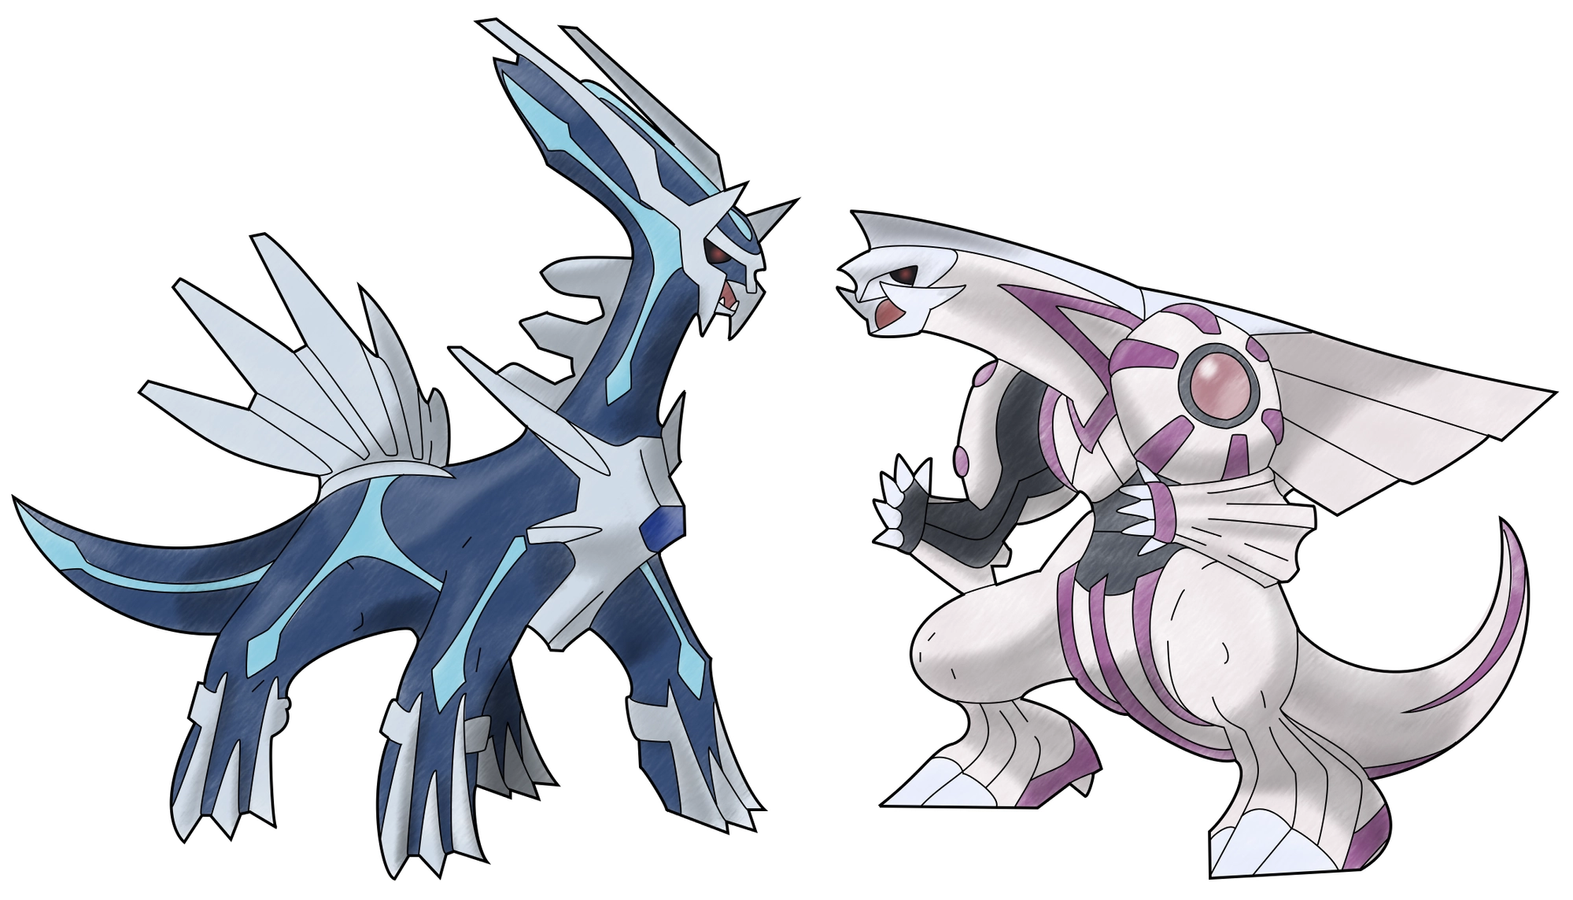 Dialga and Palkia stand side by side.